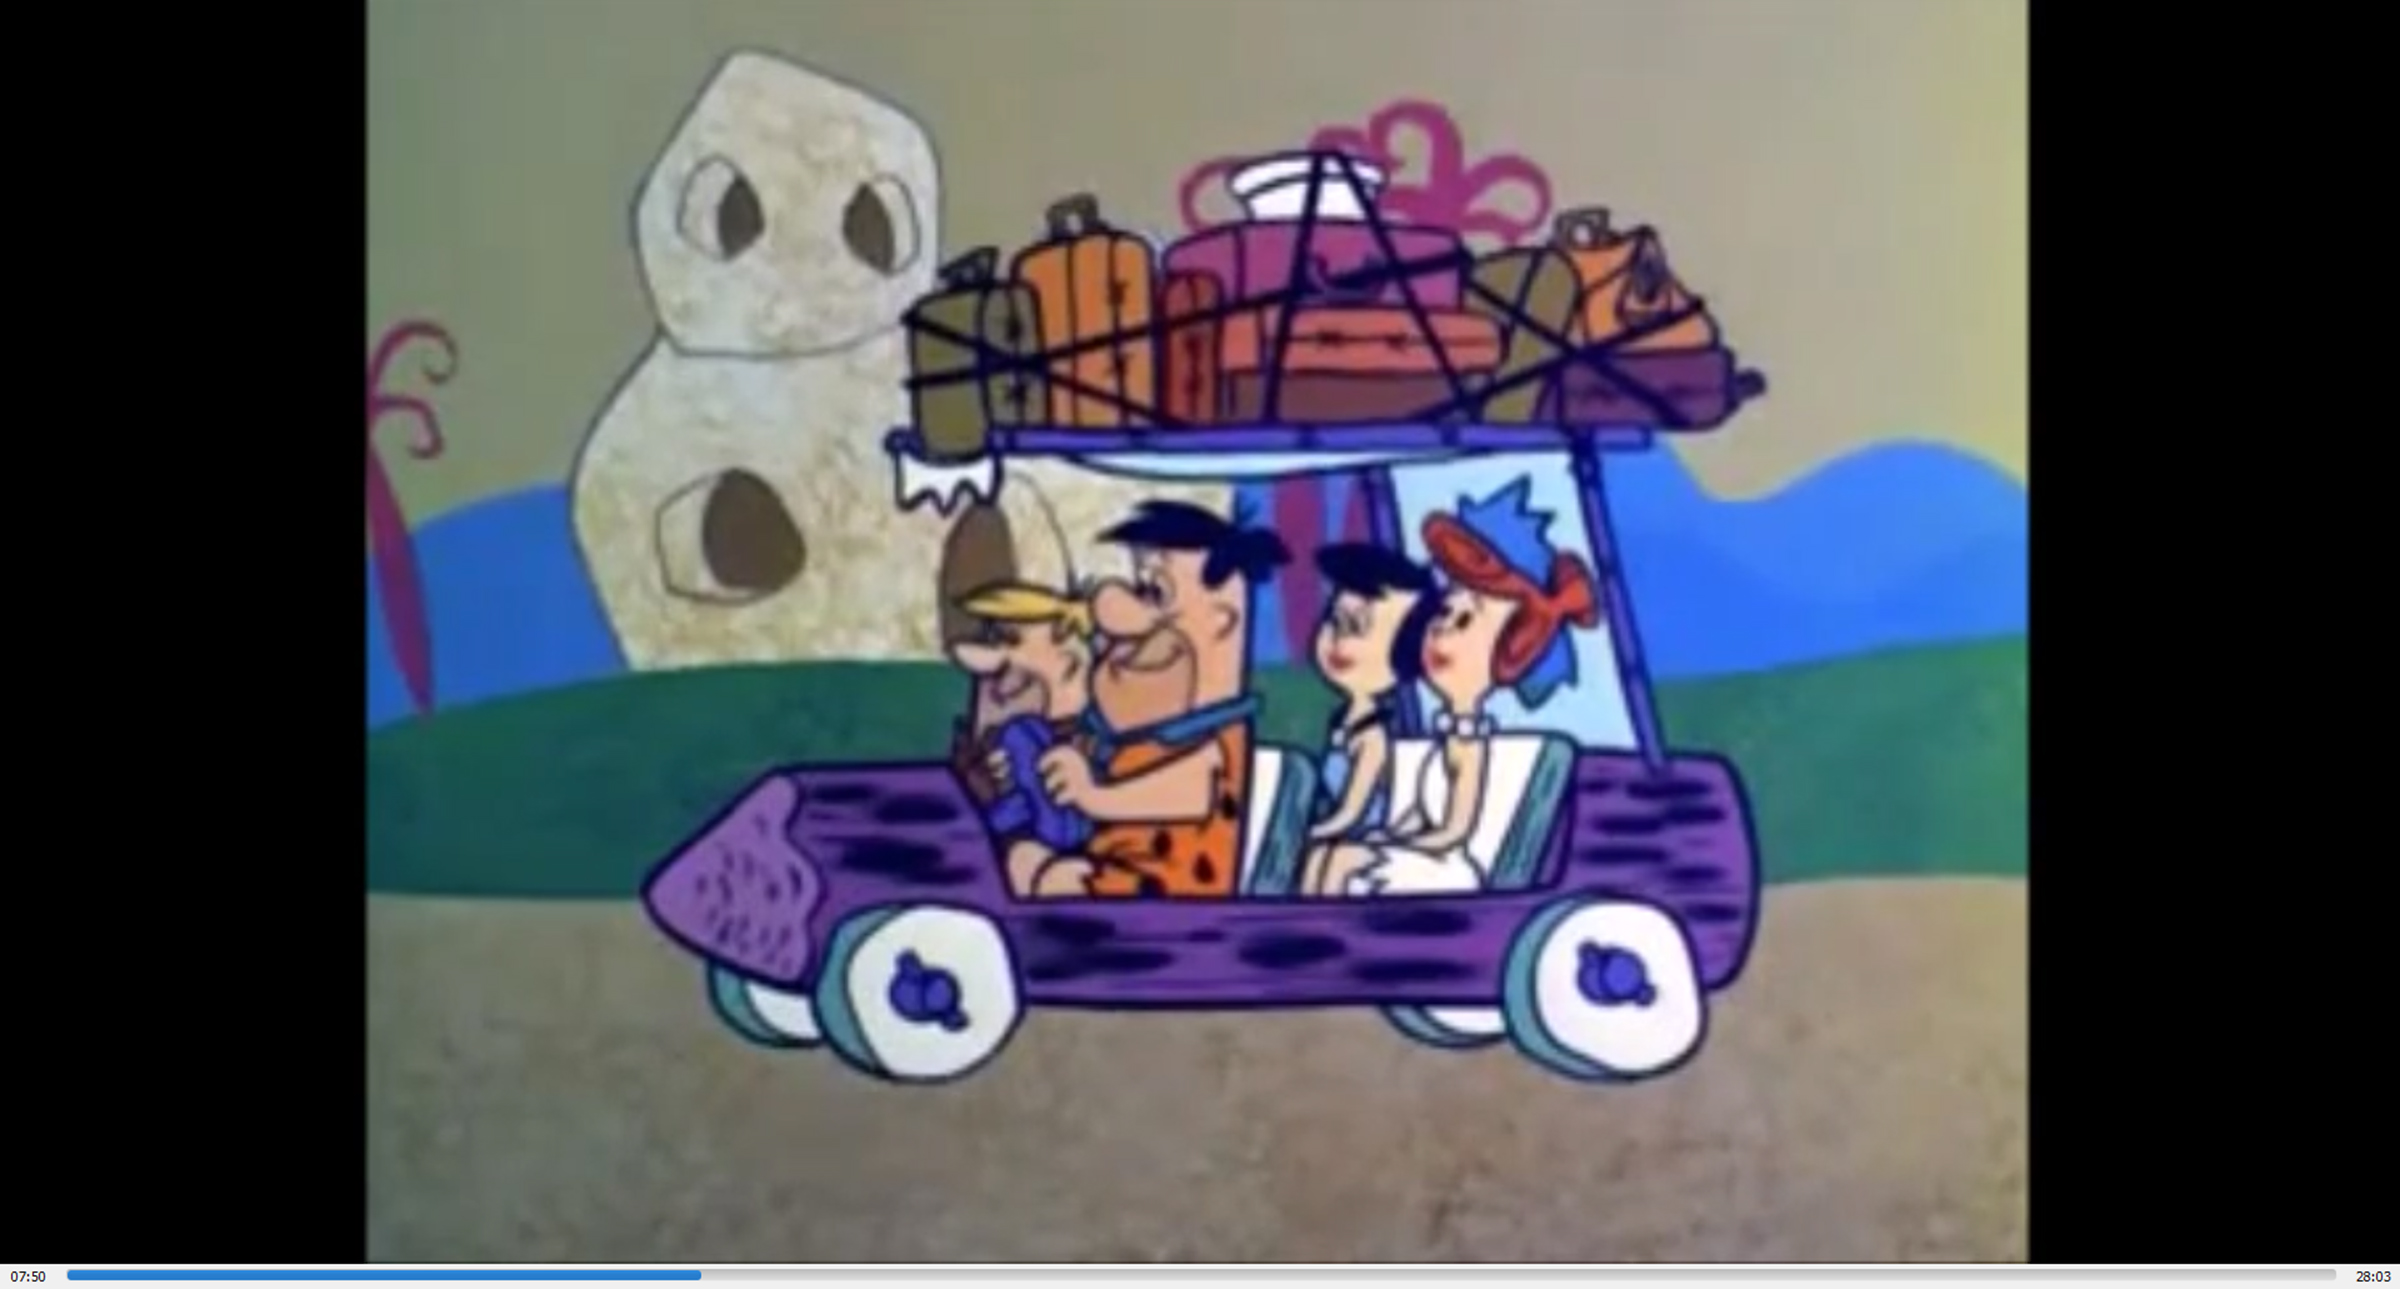 A cel from “The Flintstones” is among 90 animation cels that will be featured as part of the “Building a Narrative: Production Art and Pop Culture” exhibition in the Eisentrager-Howard Gallery. The items on display are from the collection of local collect